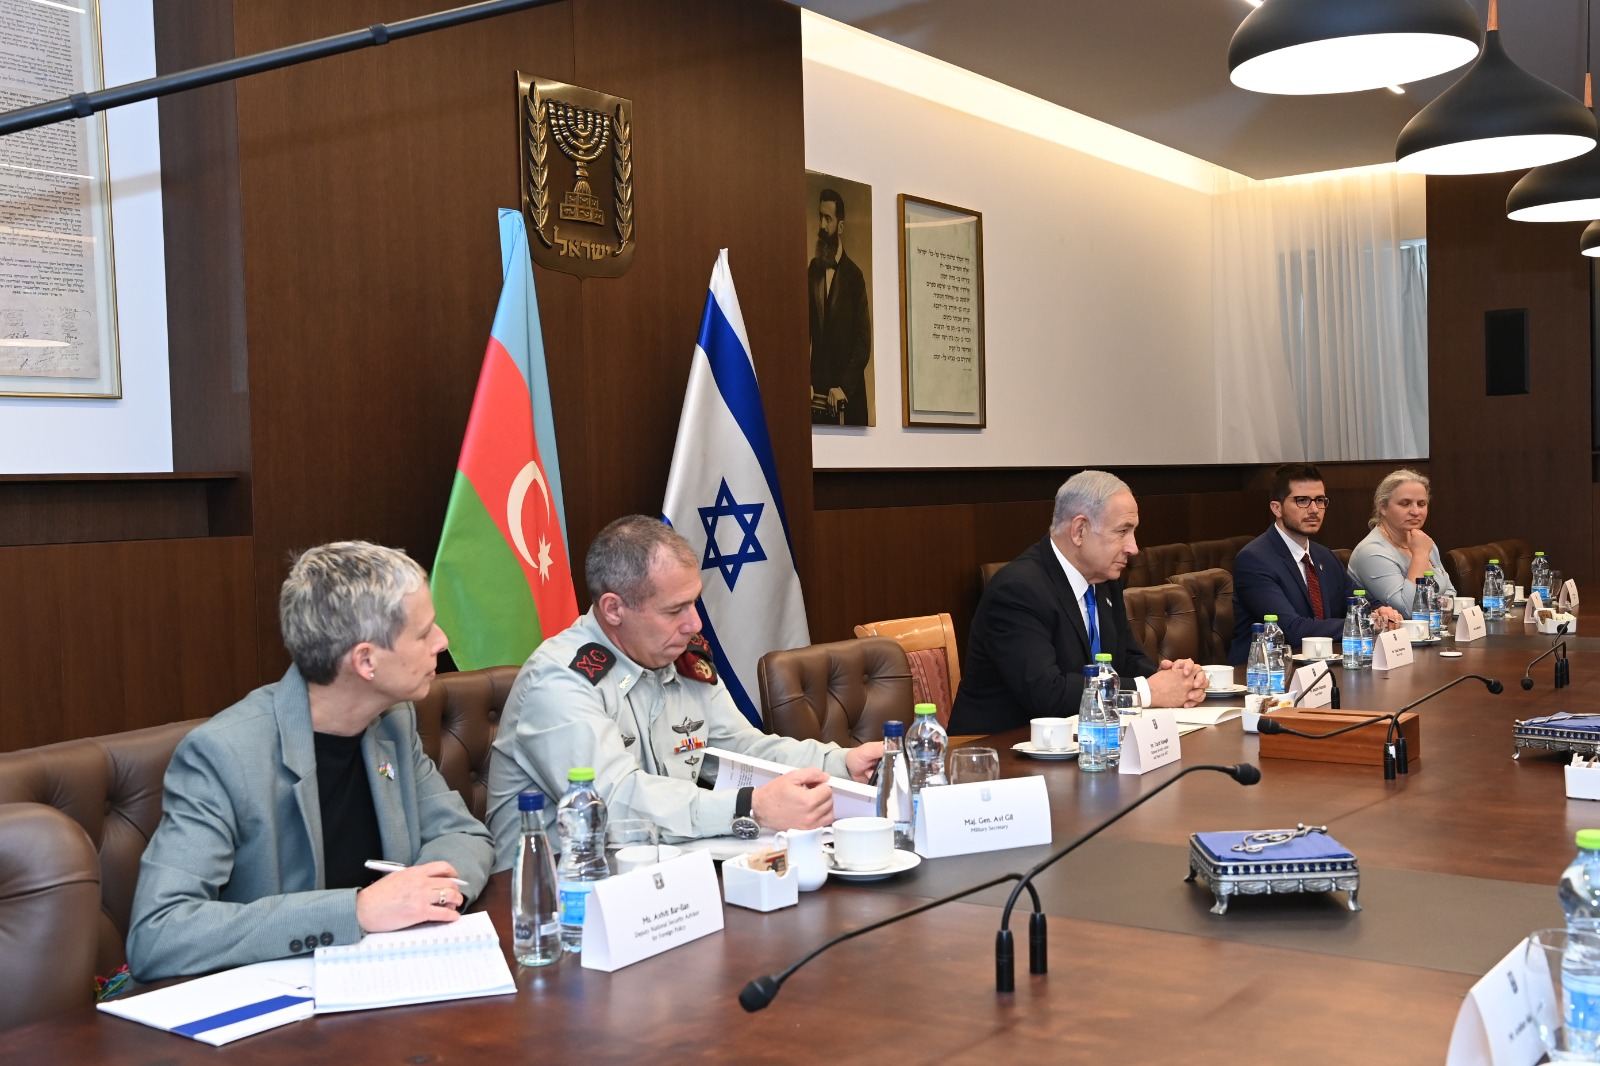 Netanyahu expresses Israel's interest in further co-op dev’t with Azerbaijan (PHOTO)